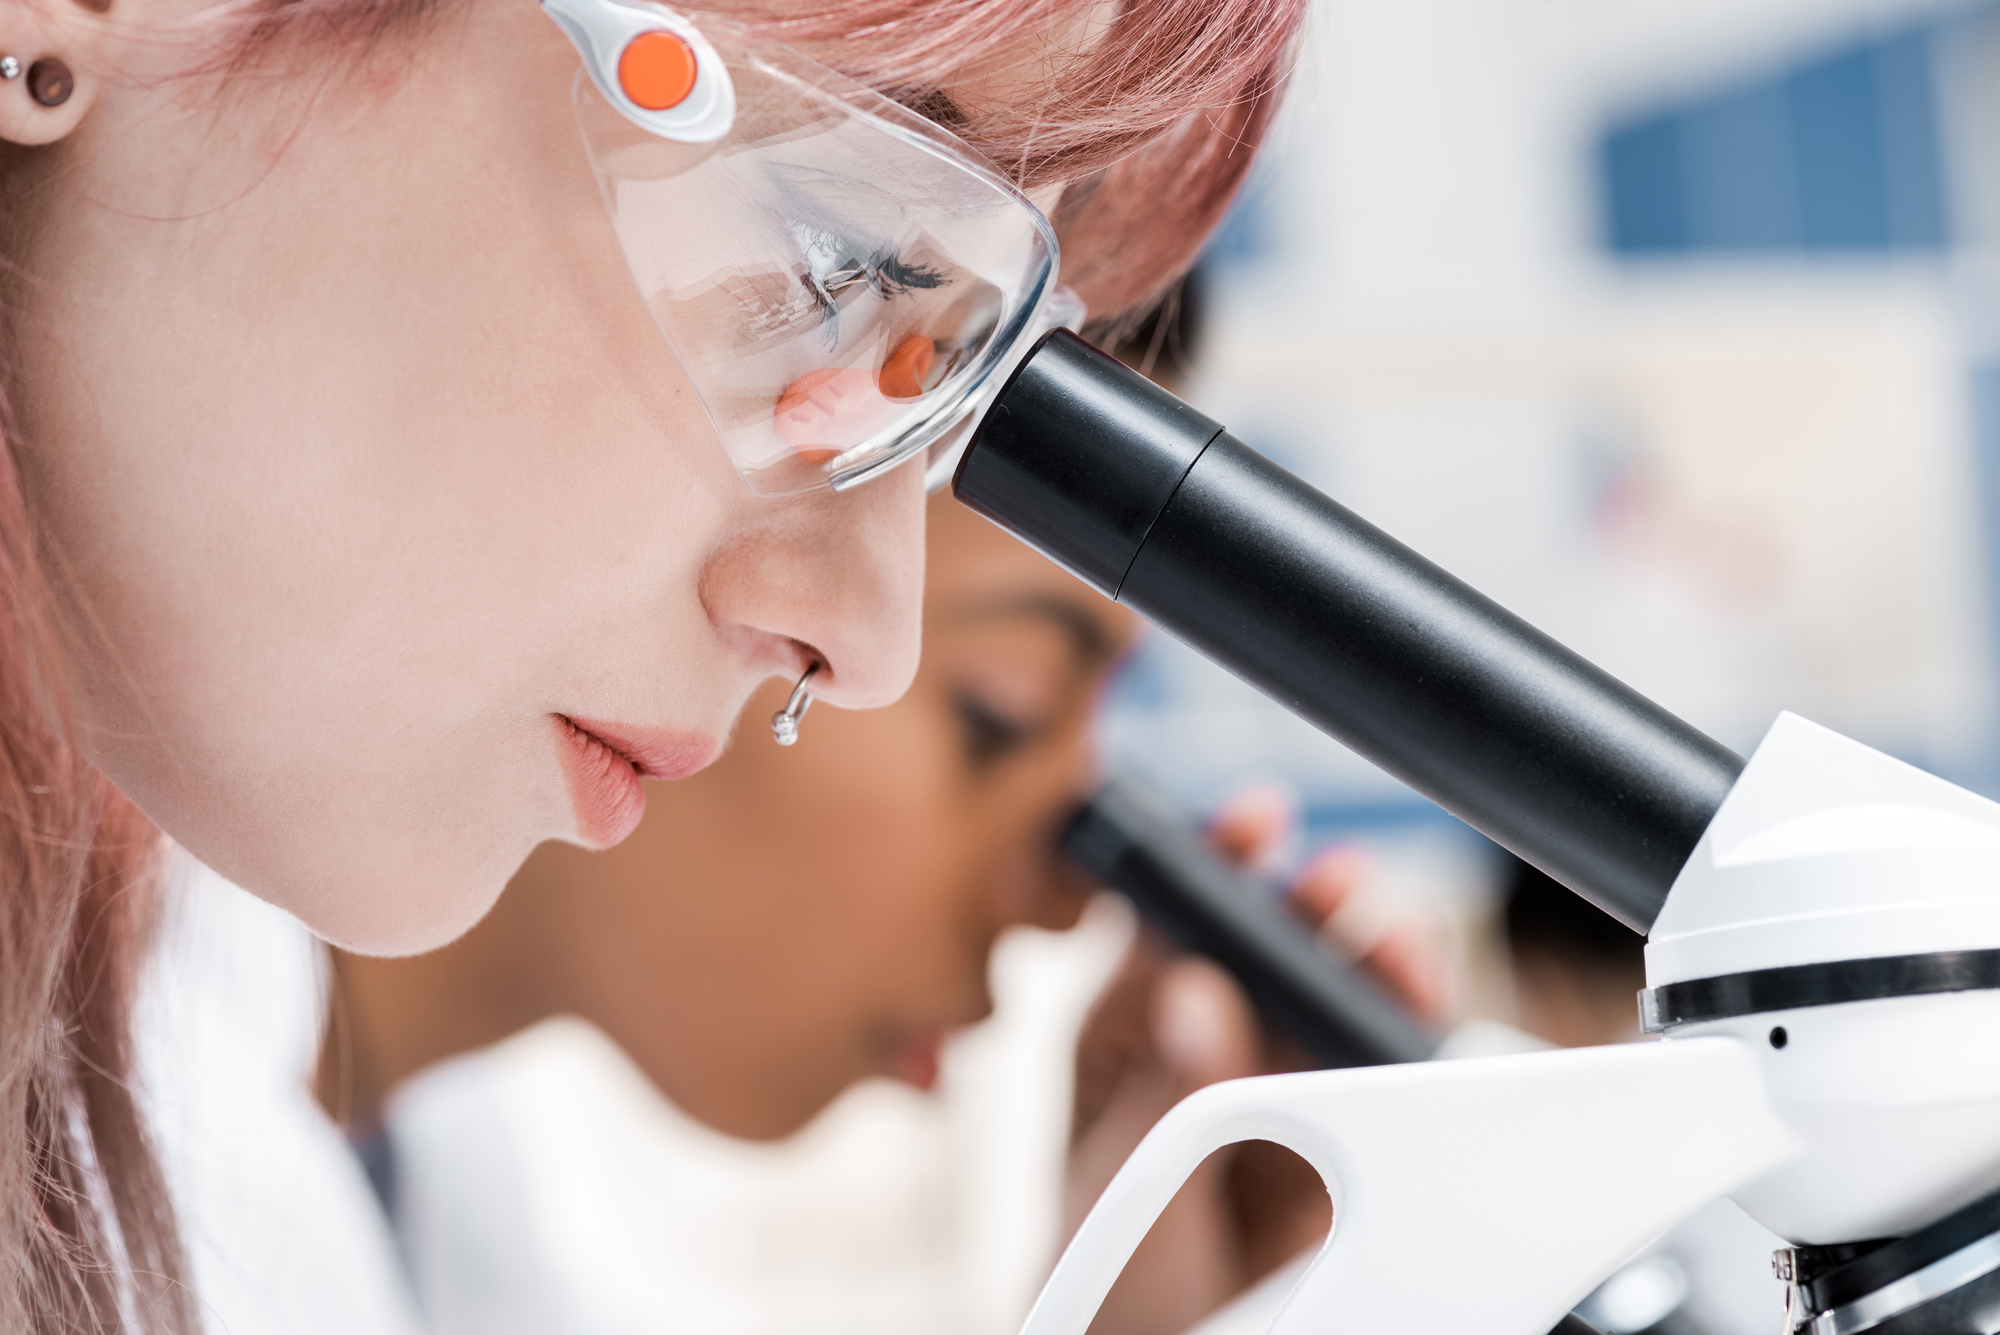 The Big Boost Theory: Helping Women Scientists Advance Their Careers Helps Everyone